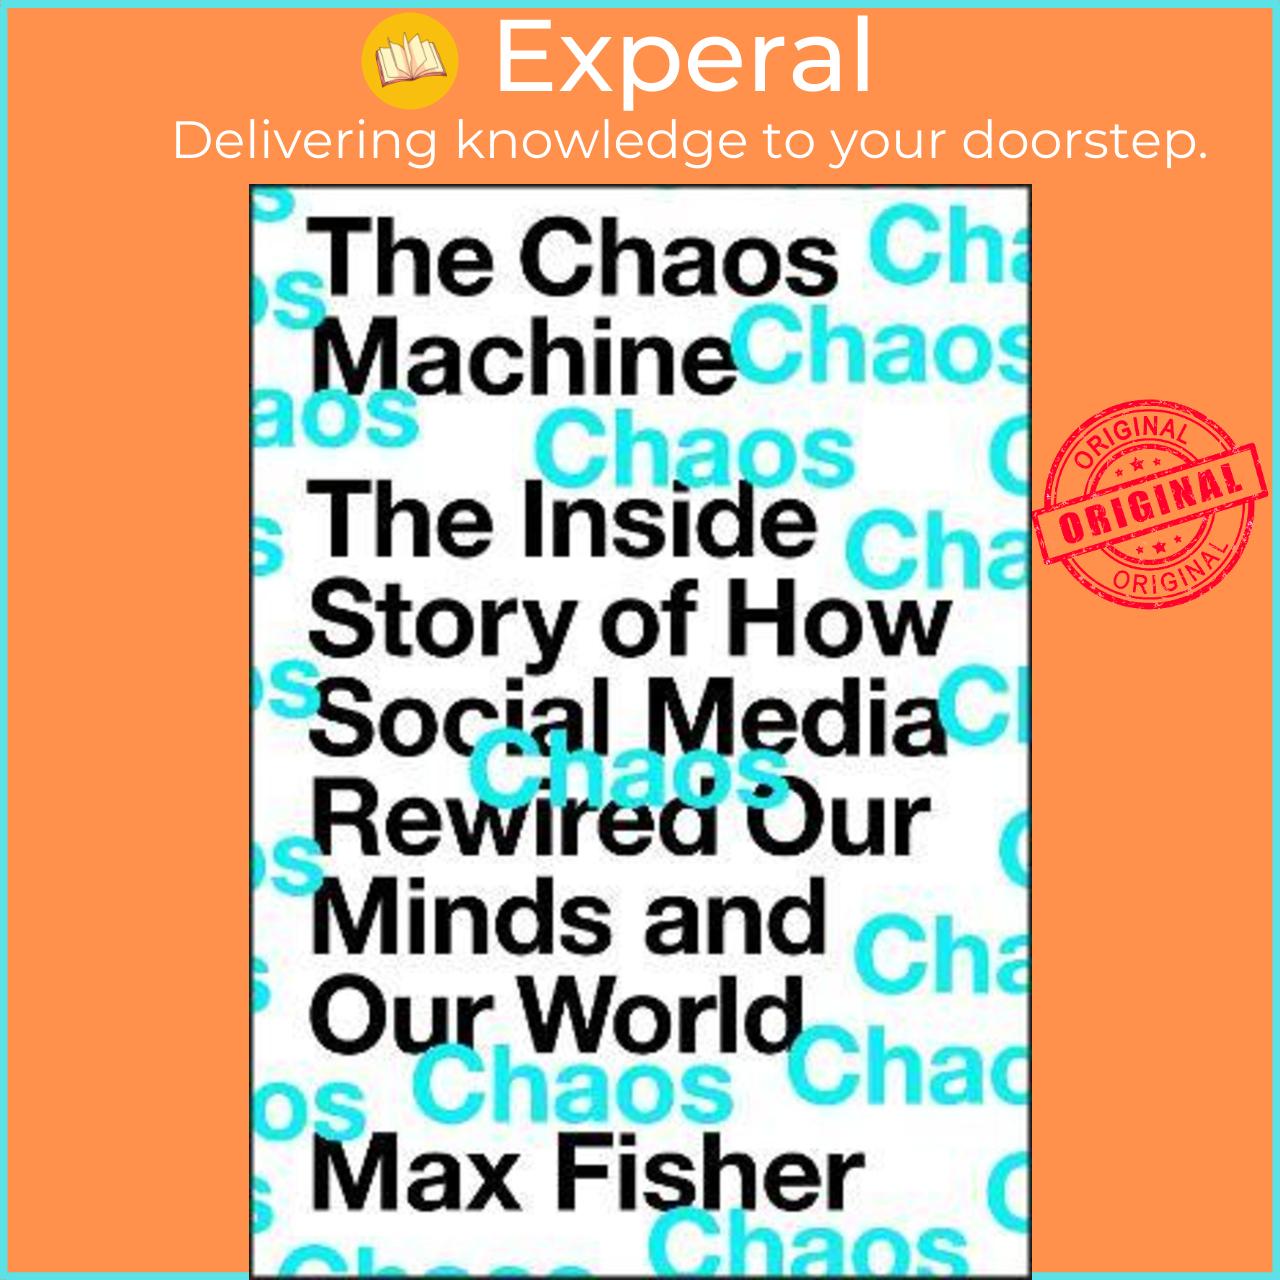 Sách - The Chaos Machine : The Inside Story of How Social Media Rewired Our Minds  by Max Fisher (UK edition, hardcover)